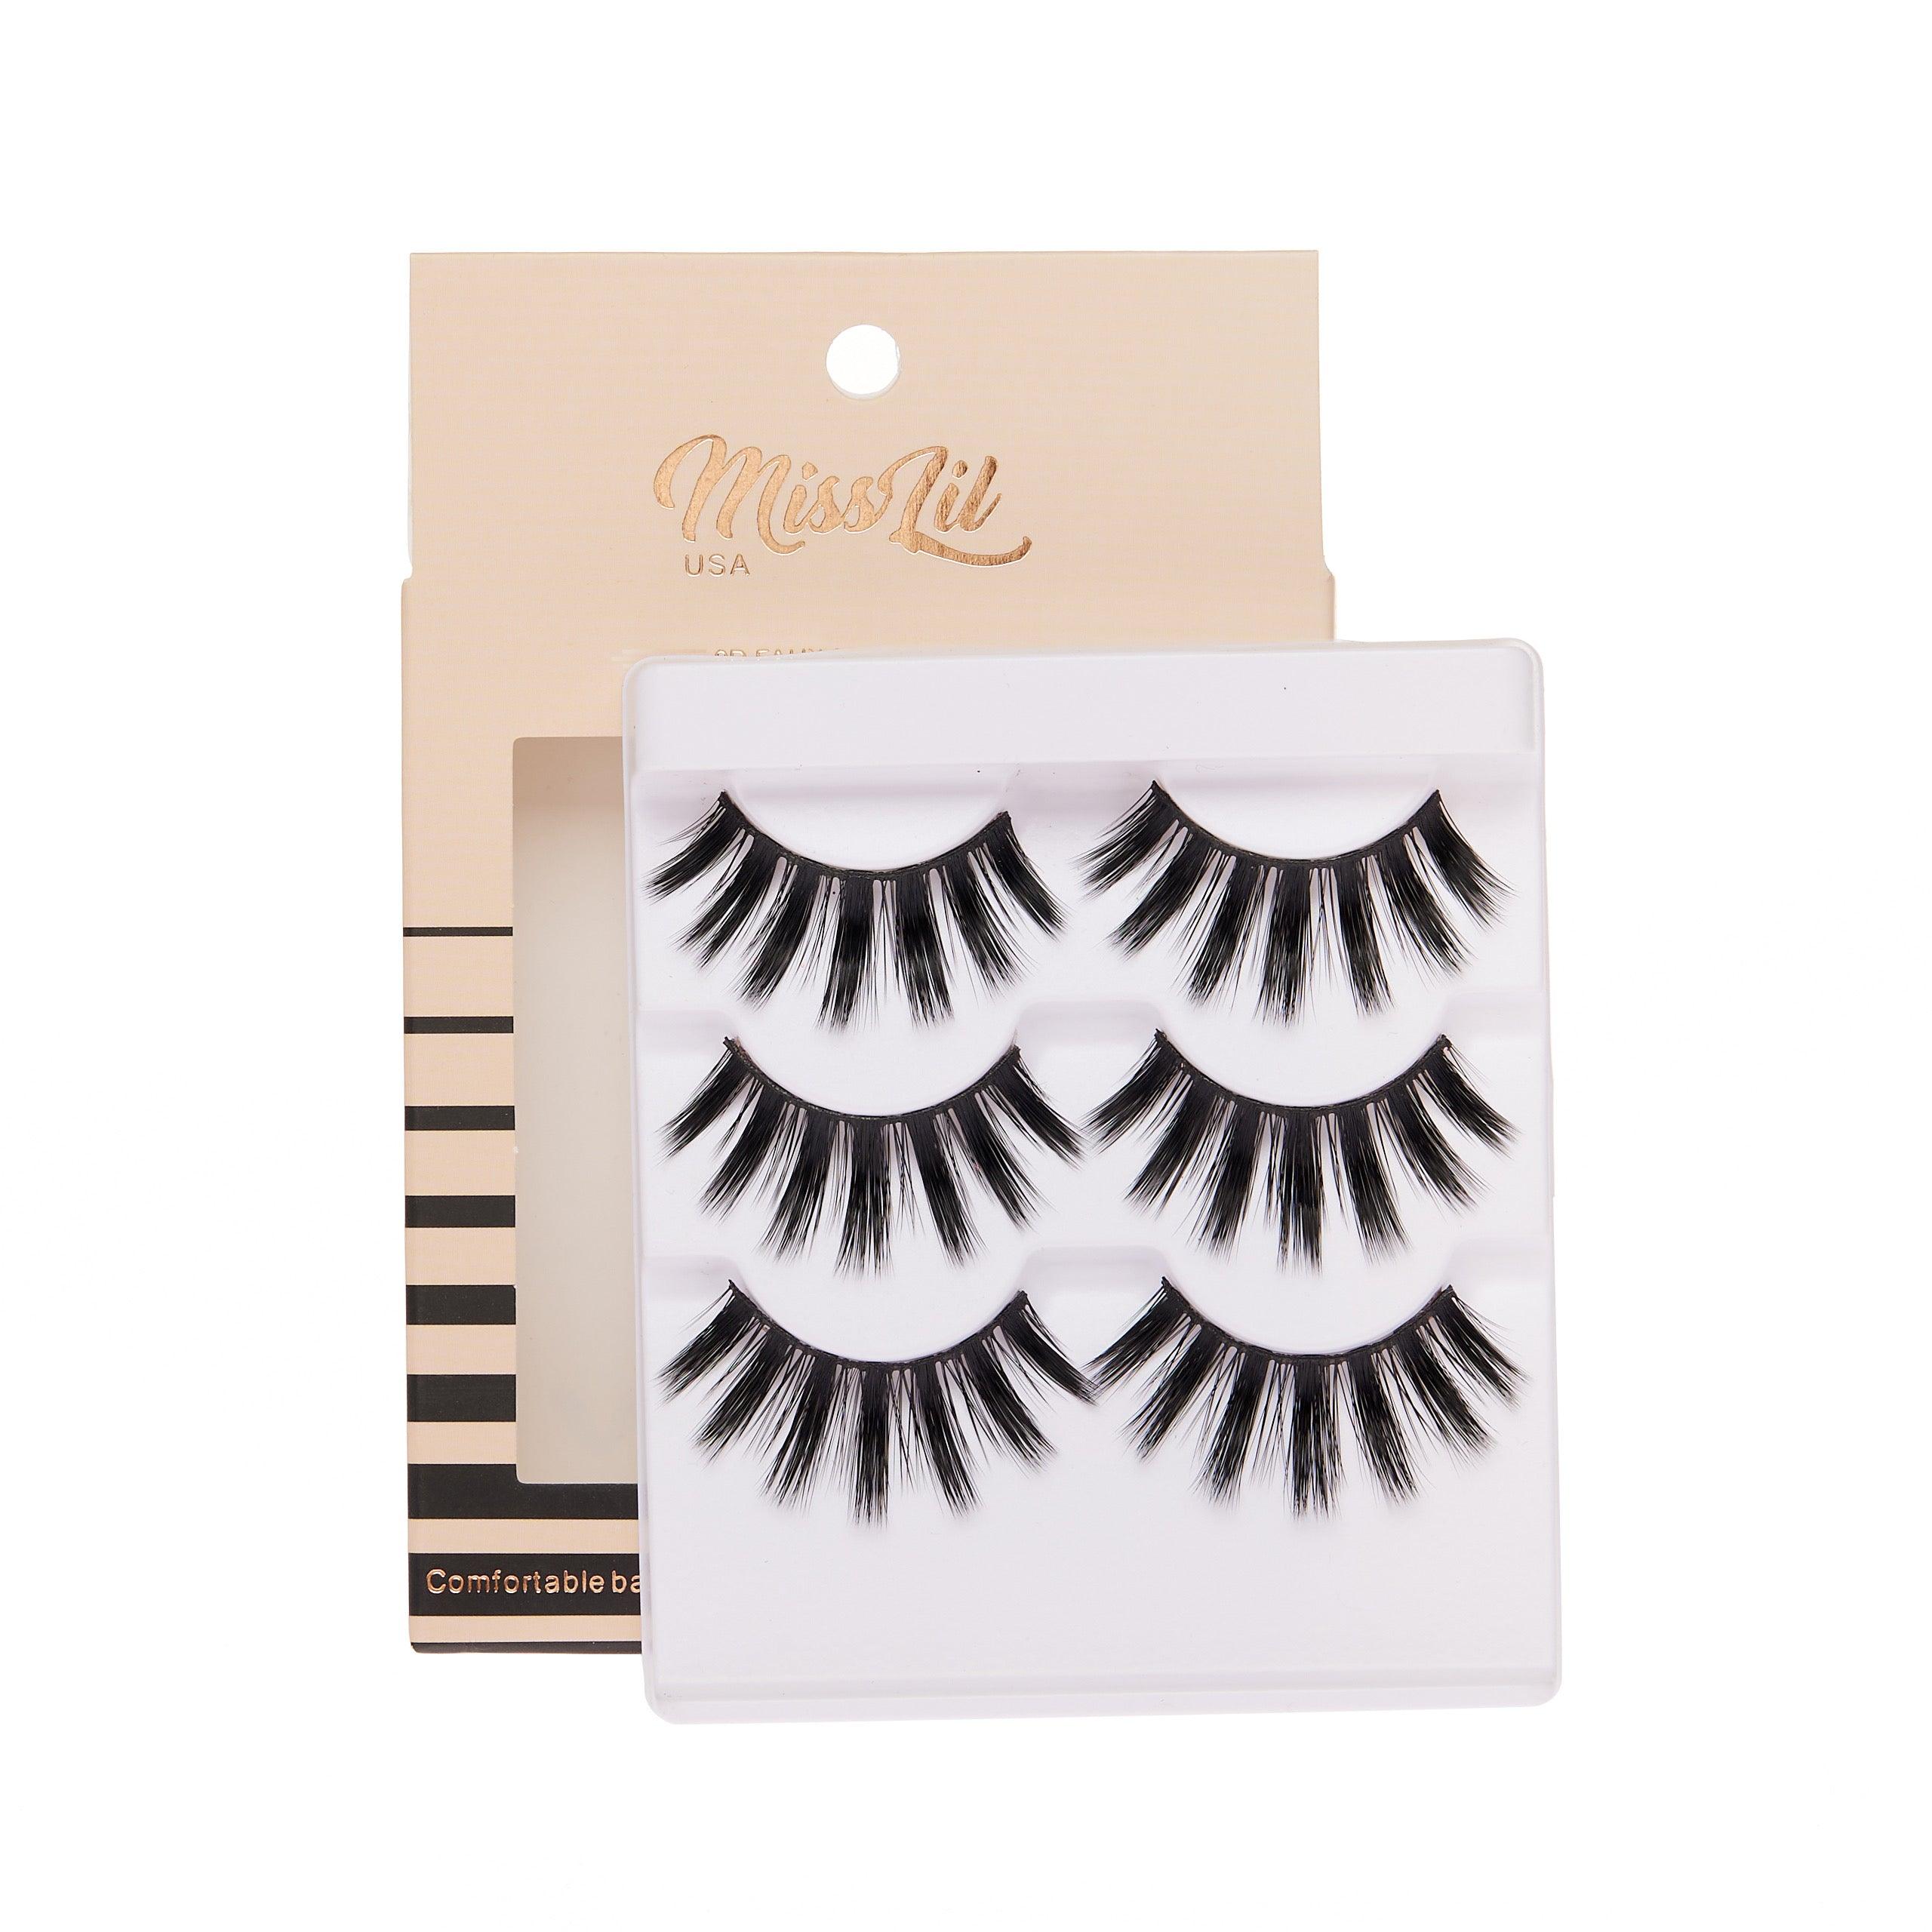 3-Pair Faux 9D Mink Eyelashes - Luxury Collection #14 - Pack of 3 - Miss Lil USA